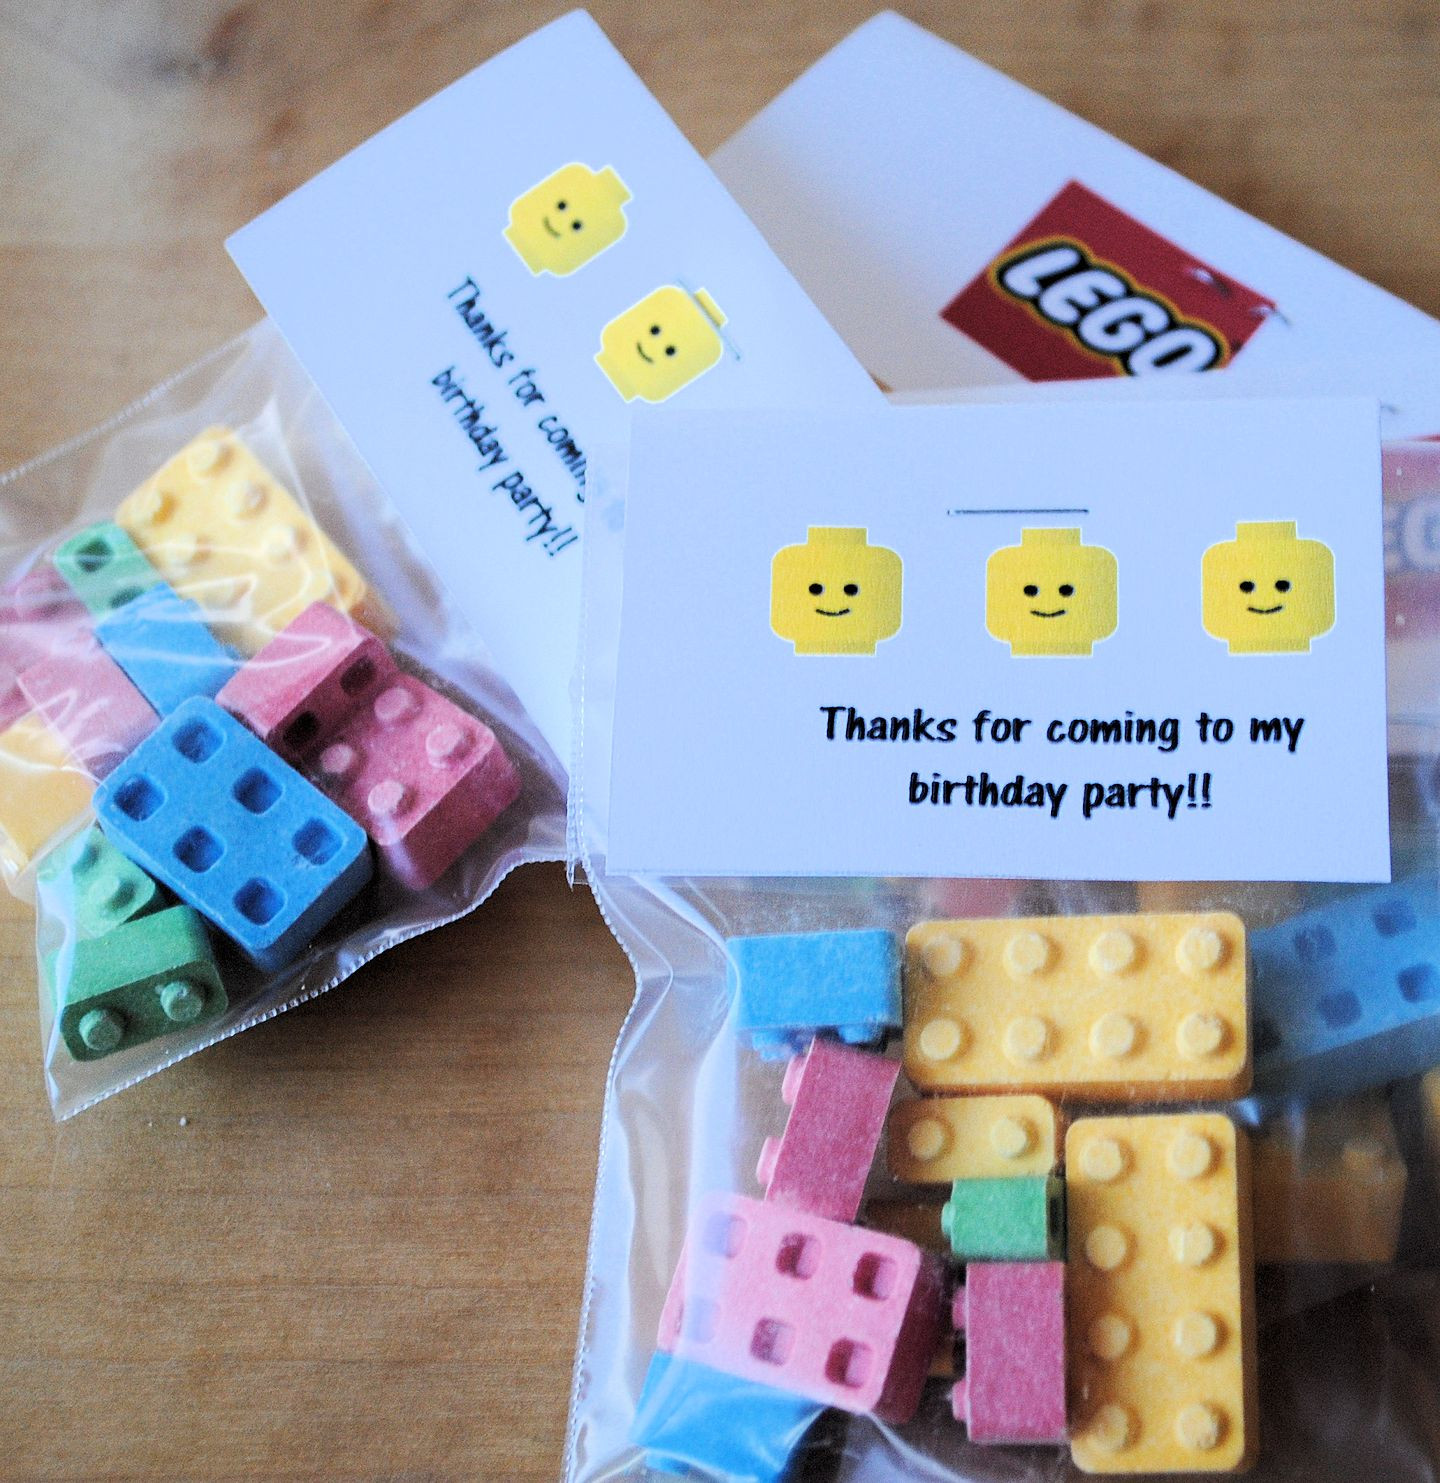 Lego Birthday Party Supplies
 Lego Birthday Party Ideas Crazy Little Projects